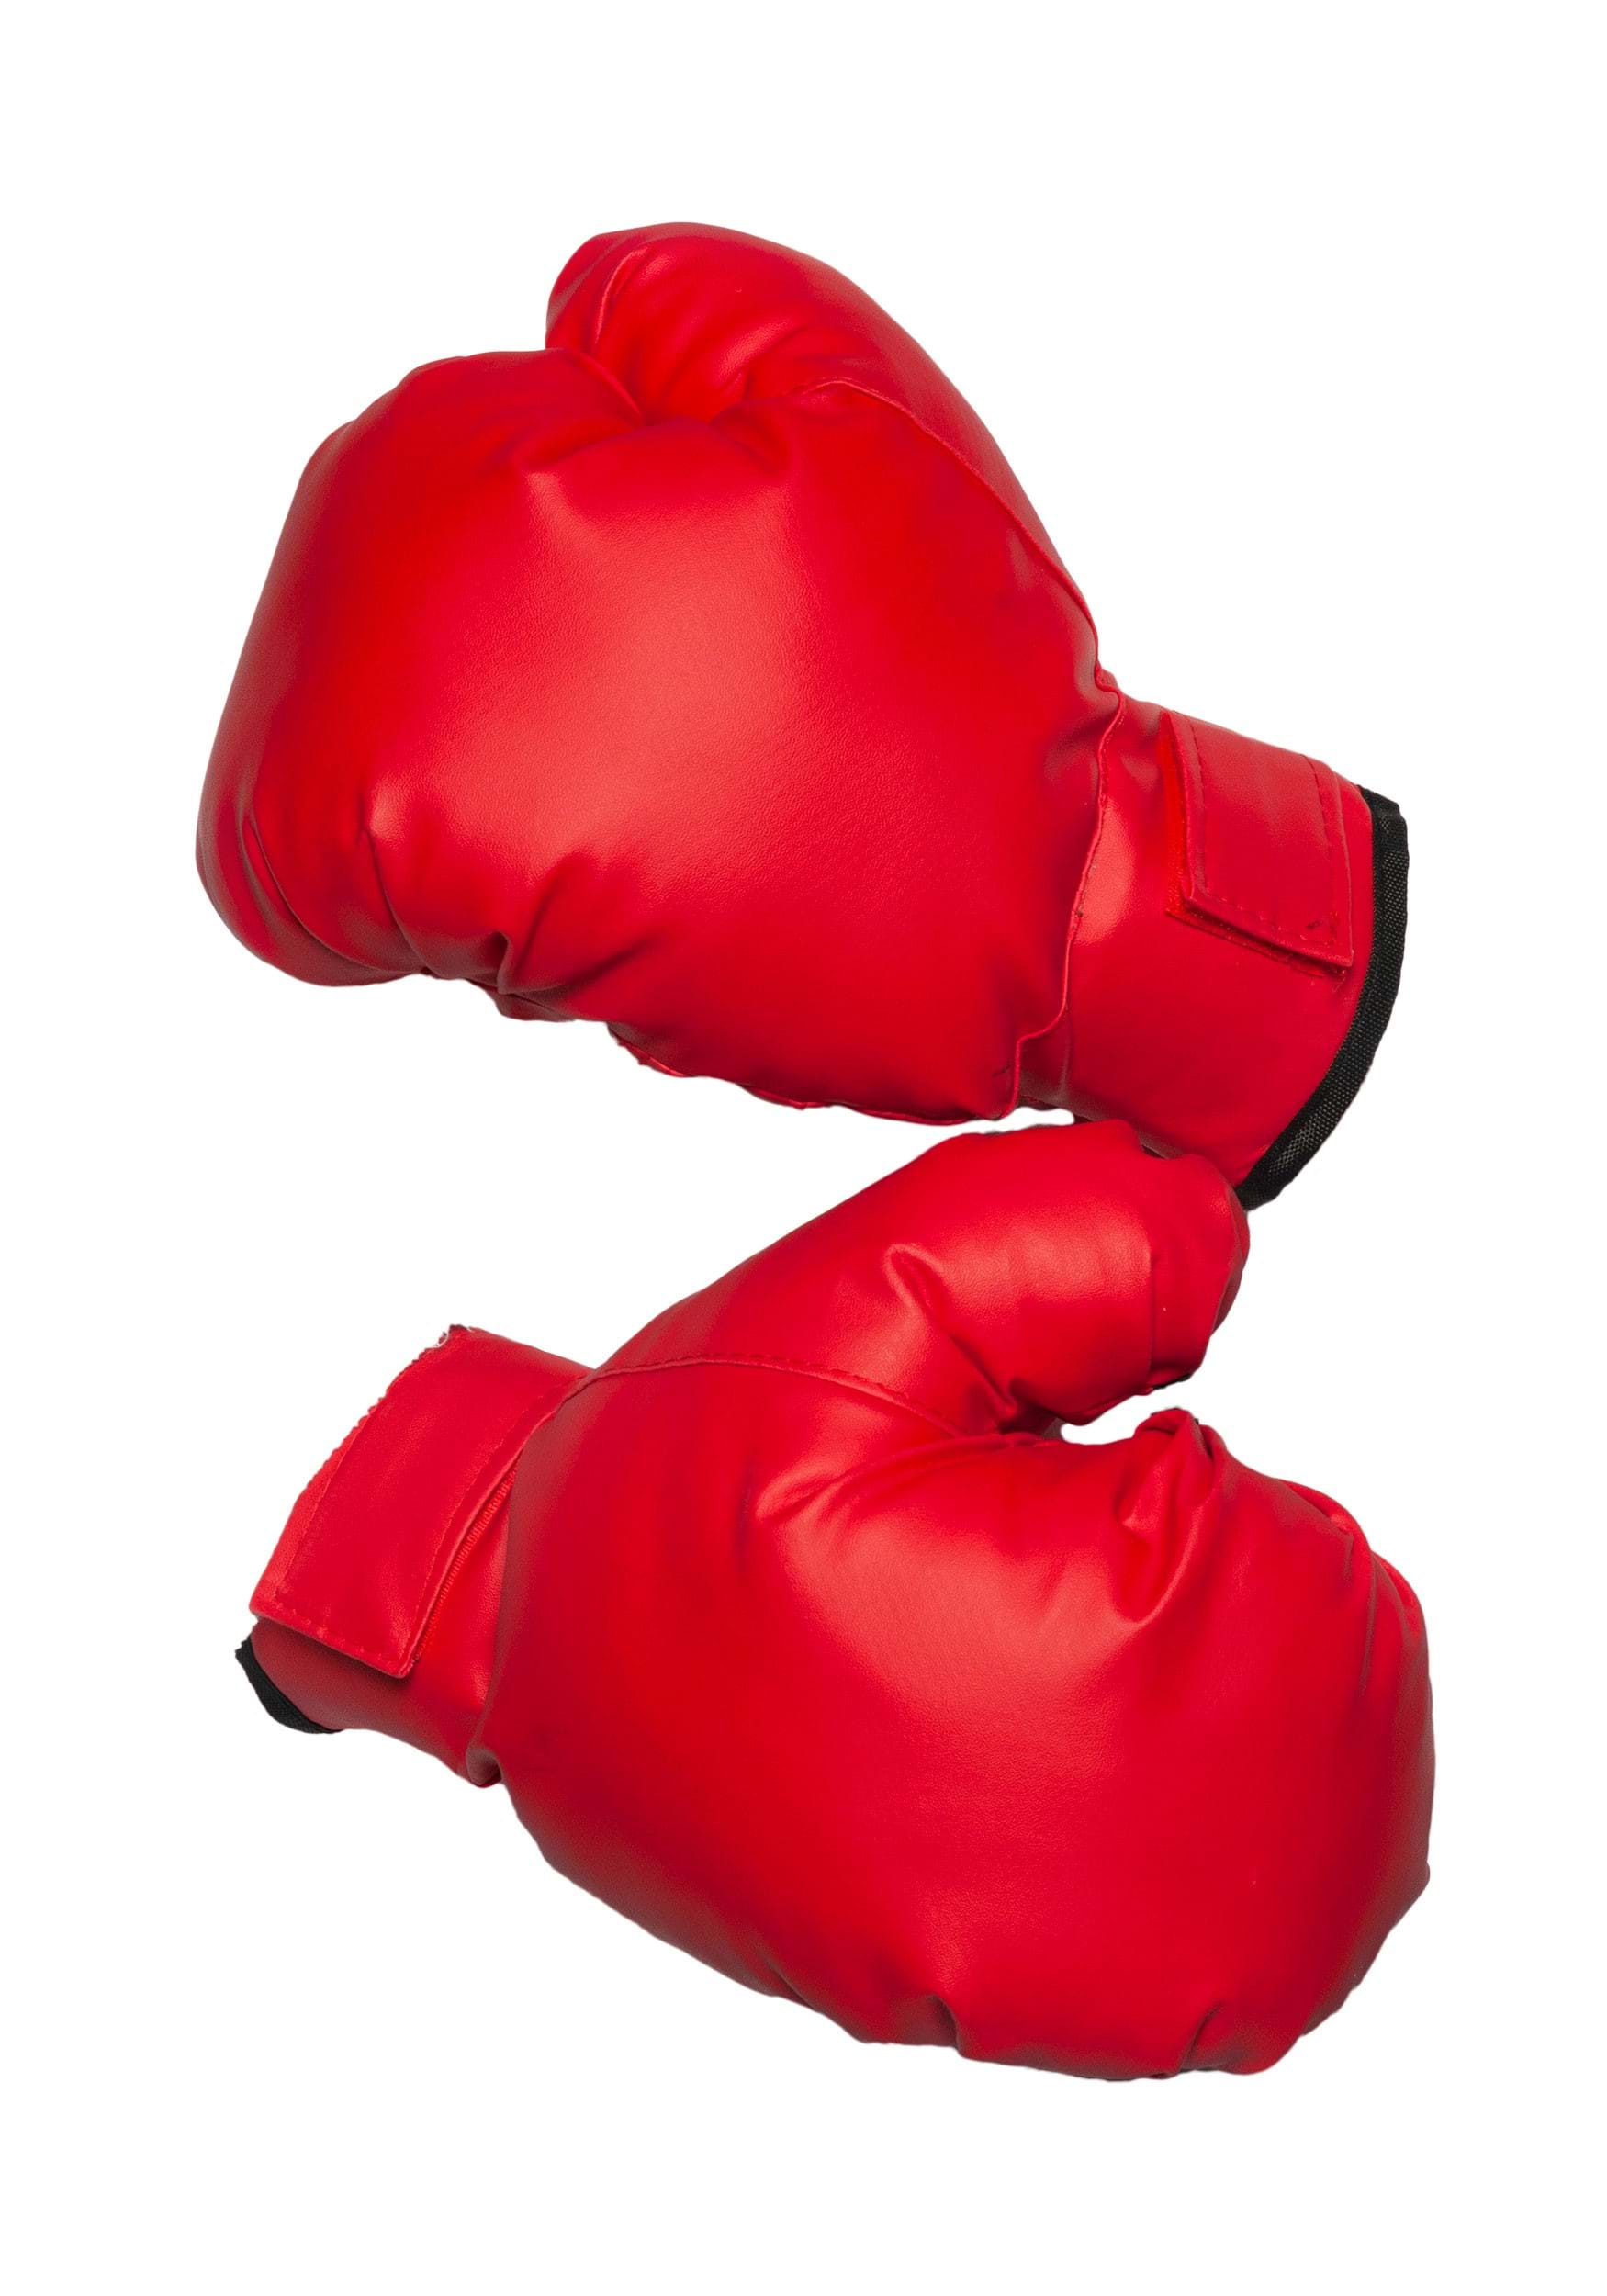 https://images.halloween.com/products/92116/1-1/adult-red-boxing-gloves.jpg